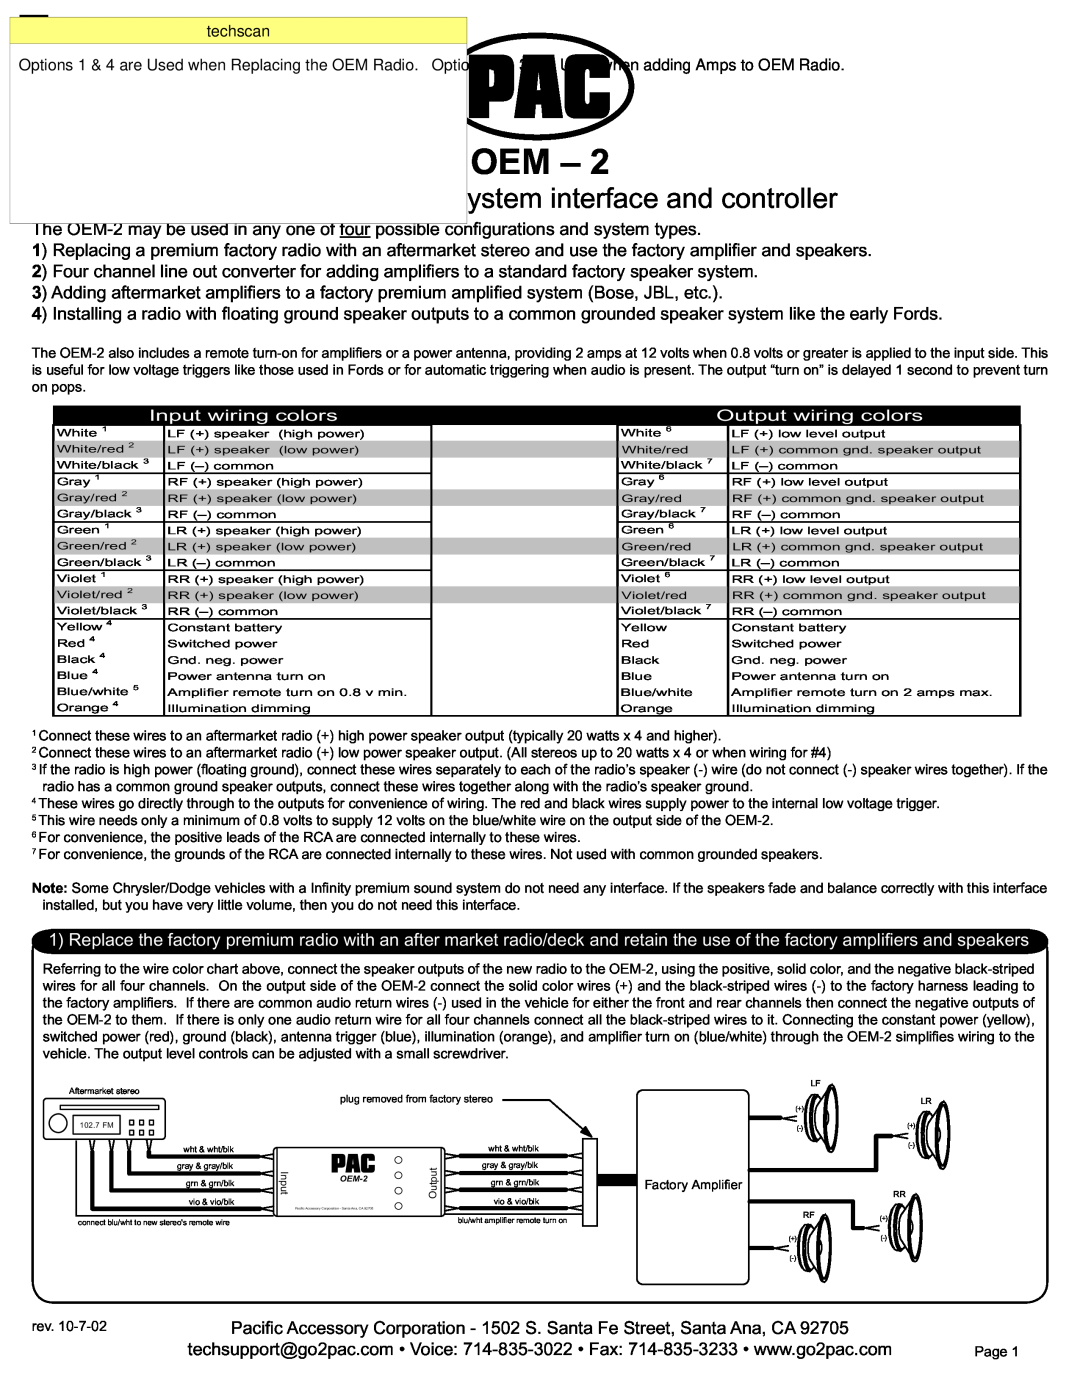 PAC OEM-2 manual Oem, Universal sound system interface and controller 